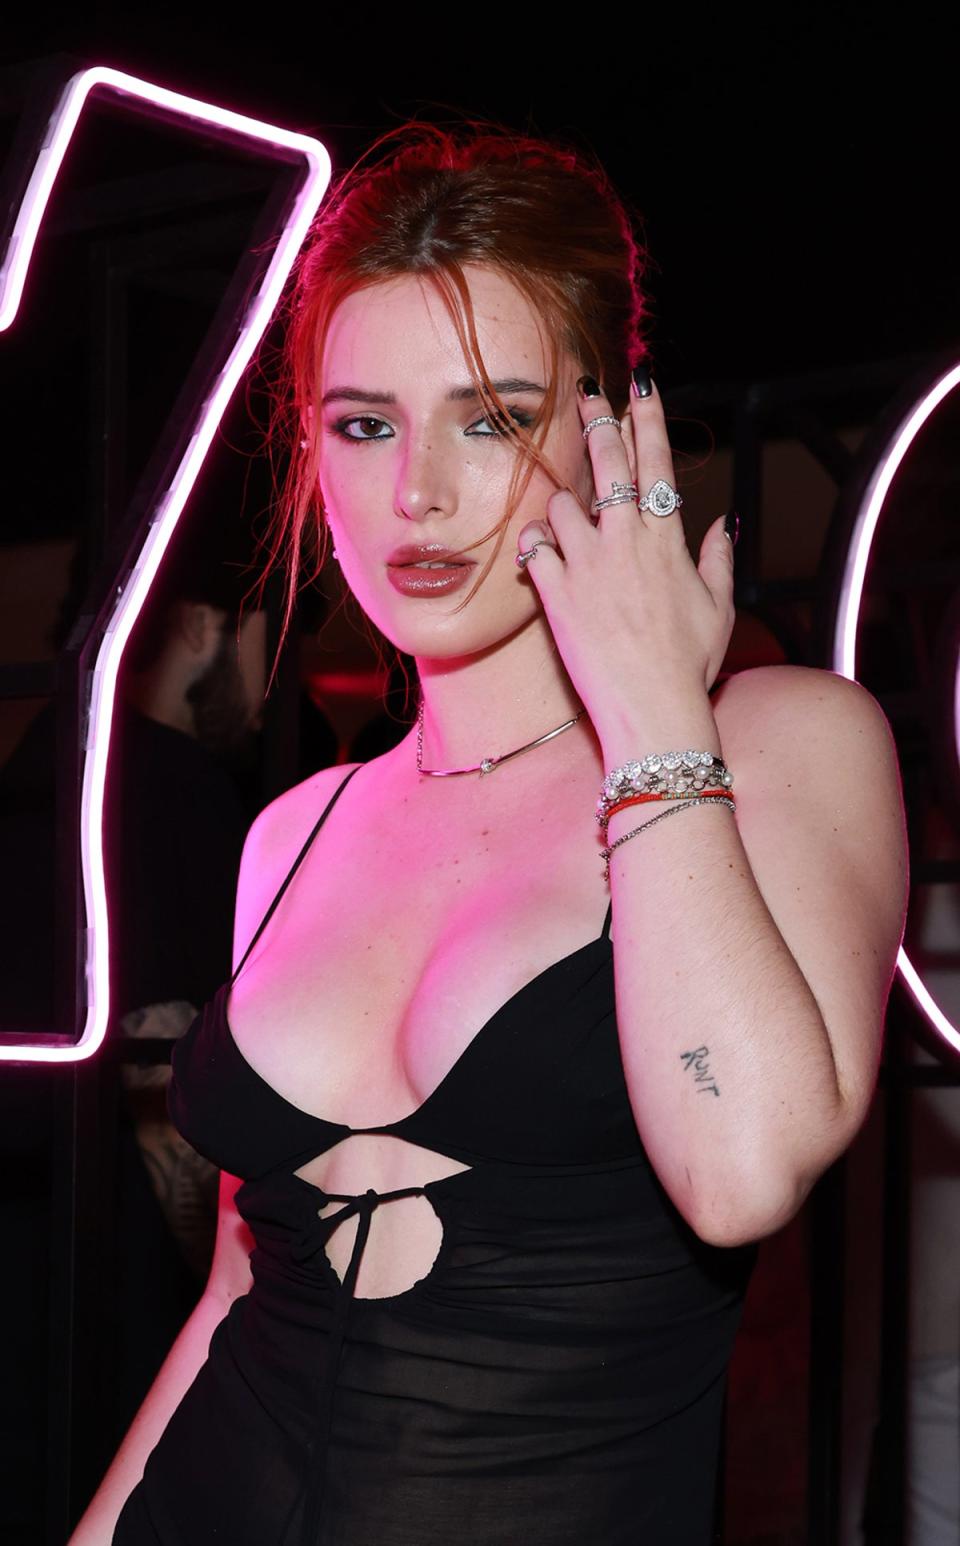 Bella Thorne’s presence on the site sparked controversy (Getty)